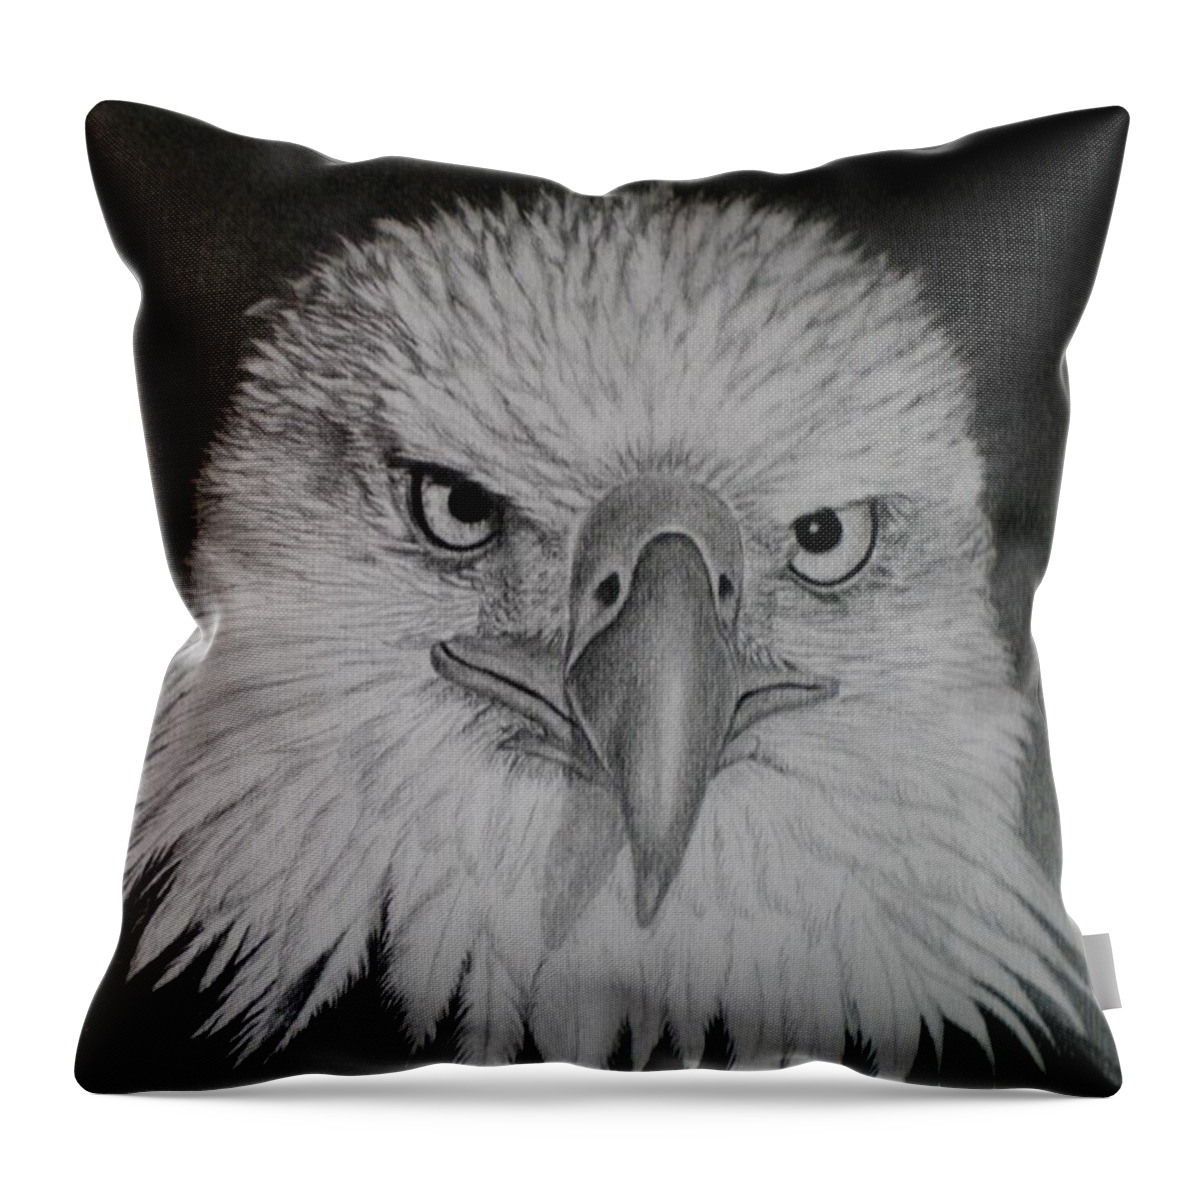 Eagle Throw Pillow featuring the drawing I am watching you by Paula Ludovino